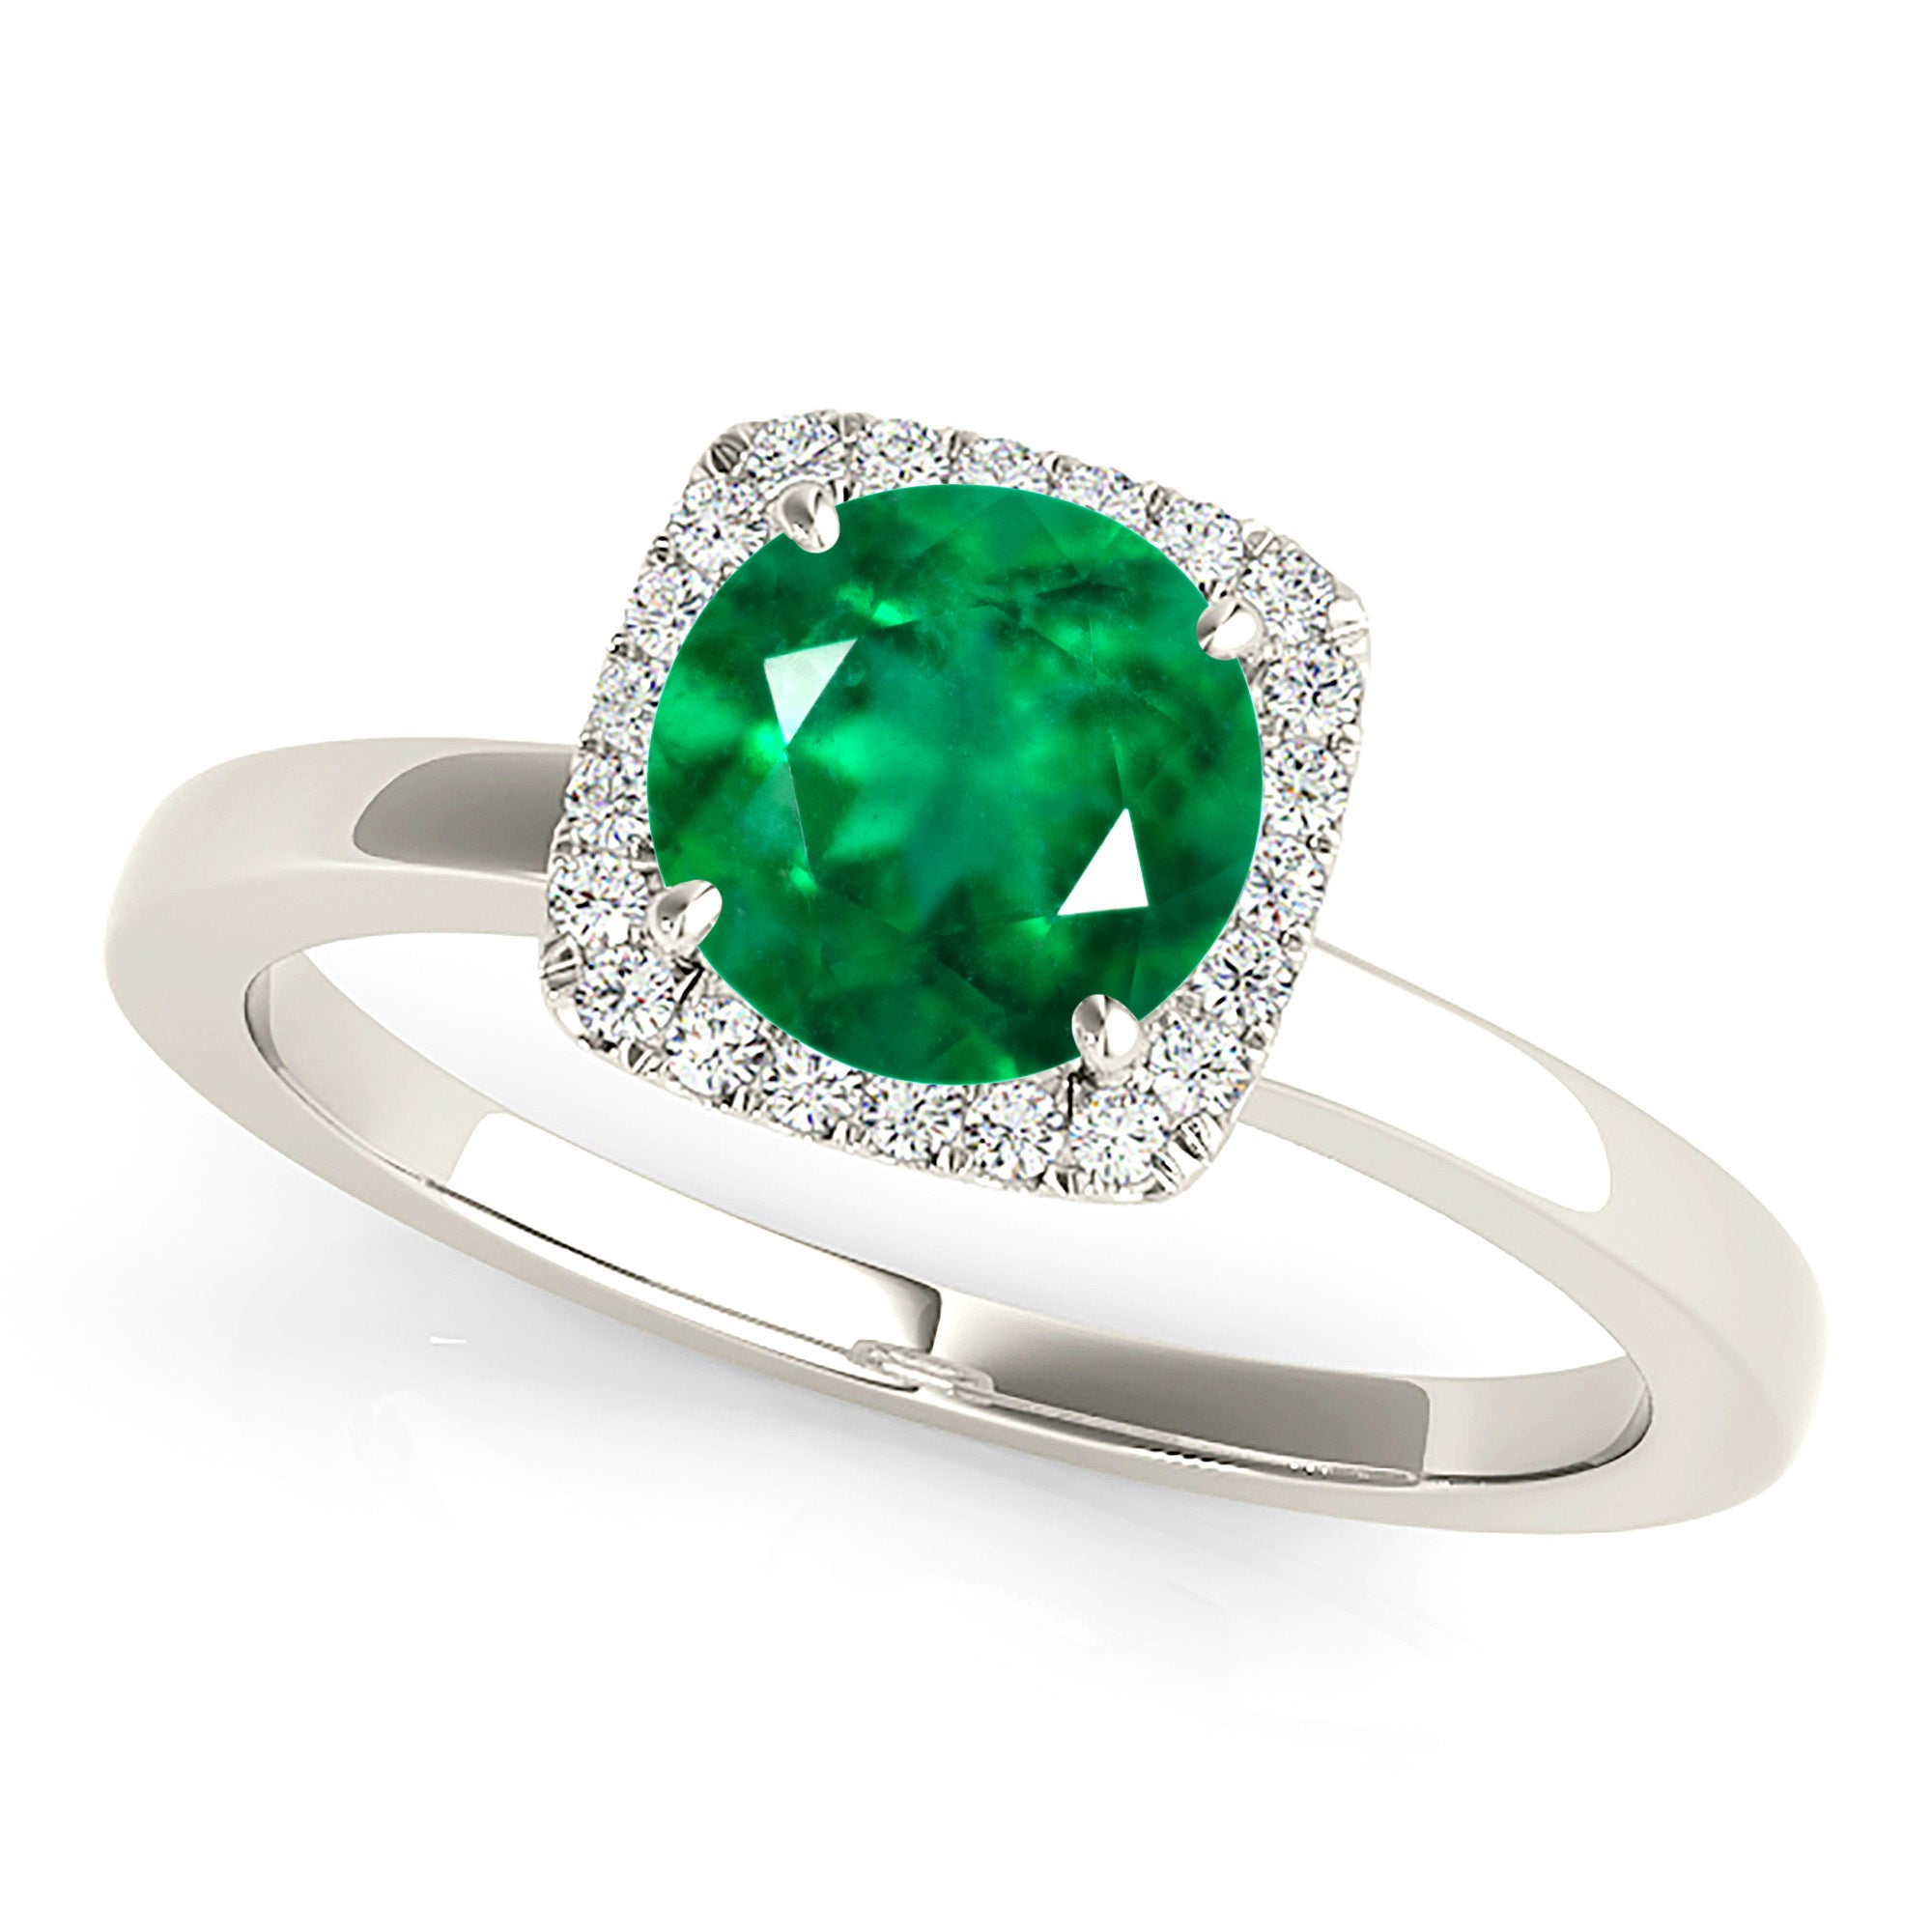 1.75 ct. Genuine Emerald Ring With 0.20 ctw. Diamond Halo and Solitaire Plain band-in 14K/18K White, Yellow, Rose Gold and Platinum - Christmas Jewelry Gift -VIRABYANI